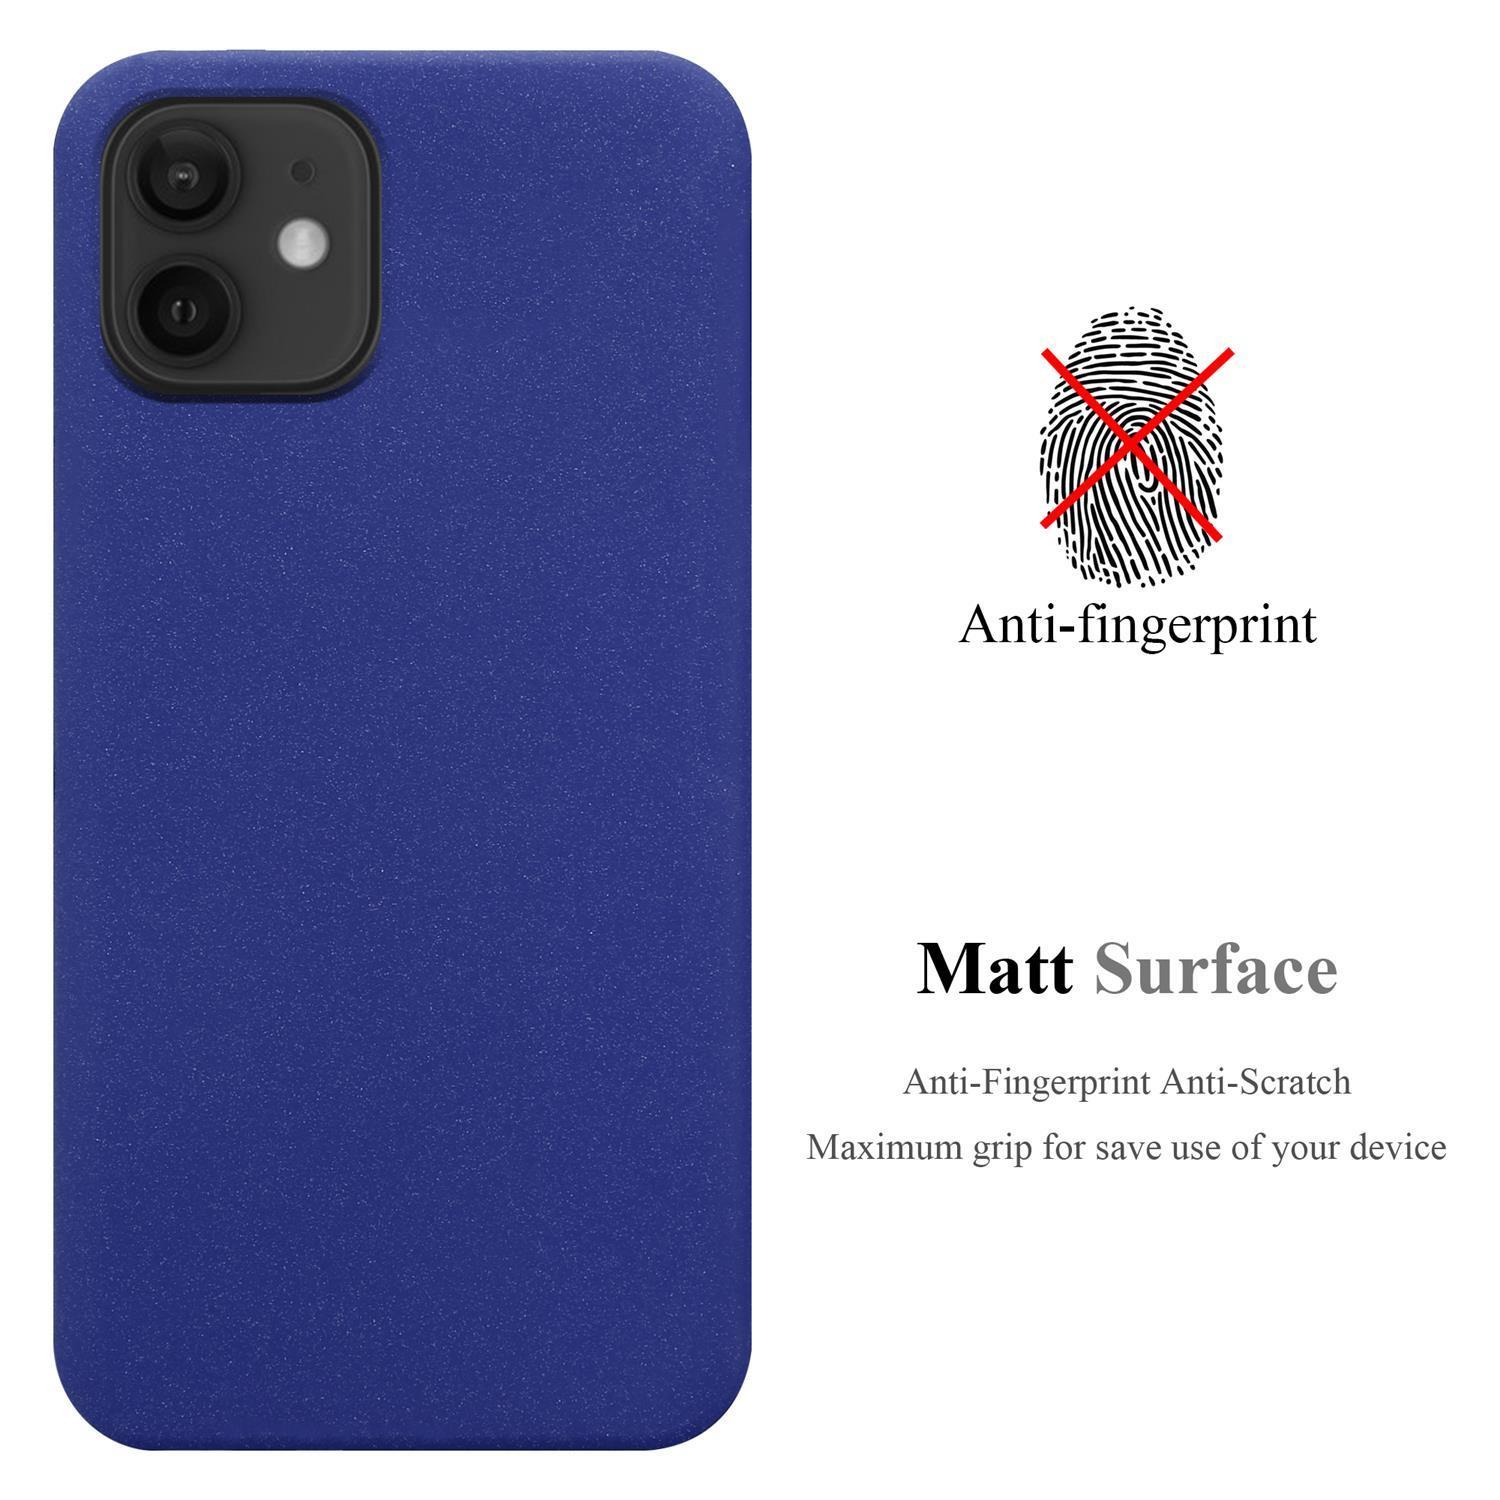 12 BLAU 12 iPhone PRO, / CADORABO DUNKEL Backcover, Apple, FROST Schutzhülle, Frosted TPU